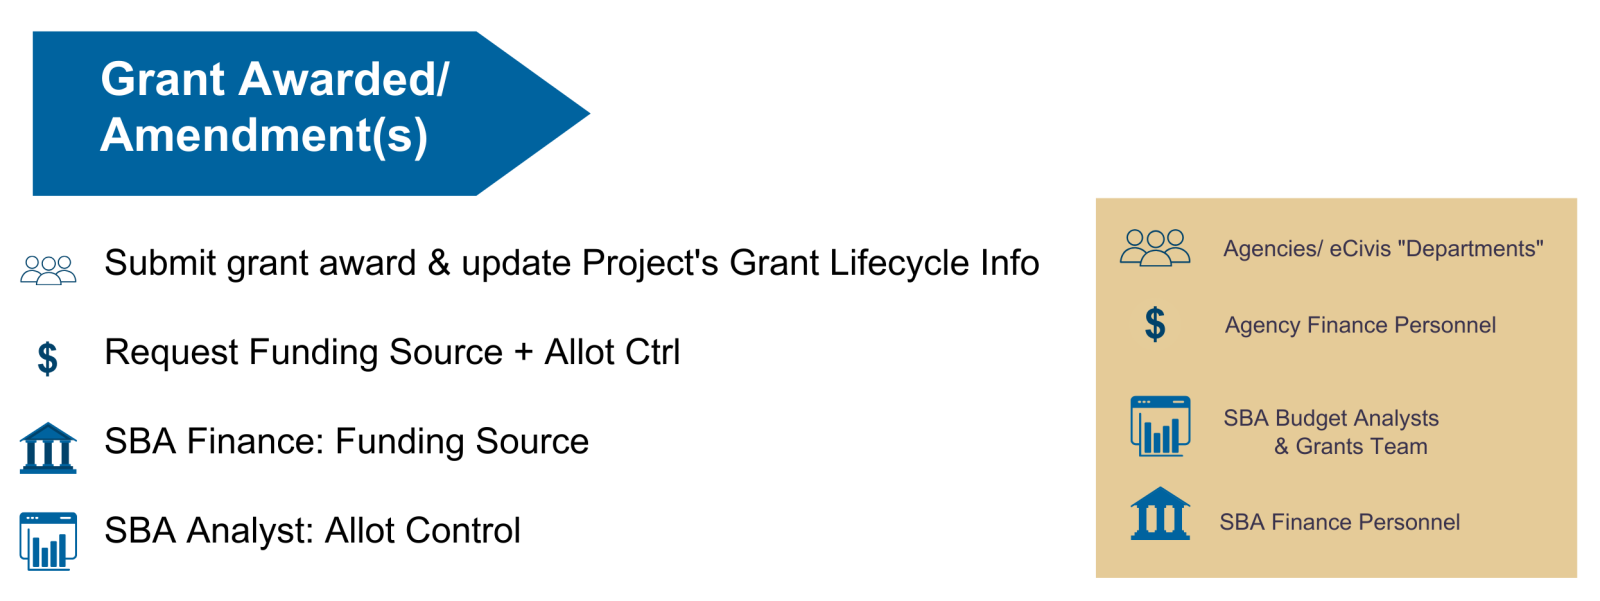  If an Indiana State Agency receives notification their application has been awarded a grant, they will update their eCivis Project to the Grant Awarded stage, upload the grant award letter or notification, & update the Project's Grant Lifecycle Information. This is also the stage in which a Funding Source is requested, and Budget Journals are completed, including Allot Control. If applicable, agencies can request State Match, Substate Transfers (including attachment of the associated MOU), & submitting grant amendments.